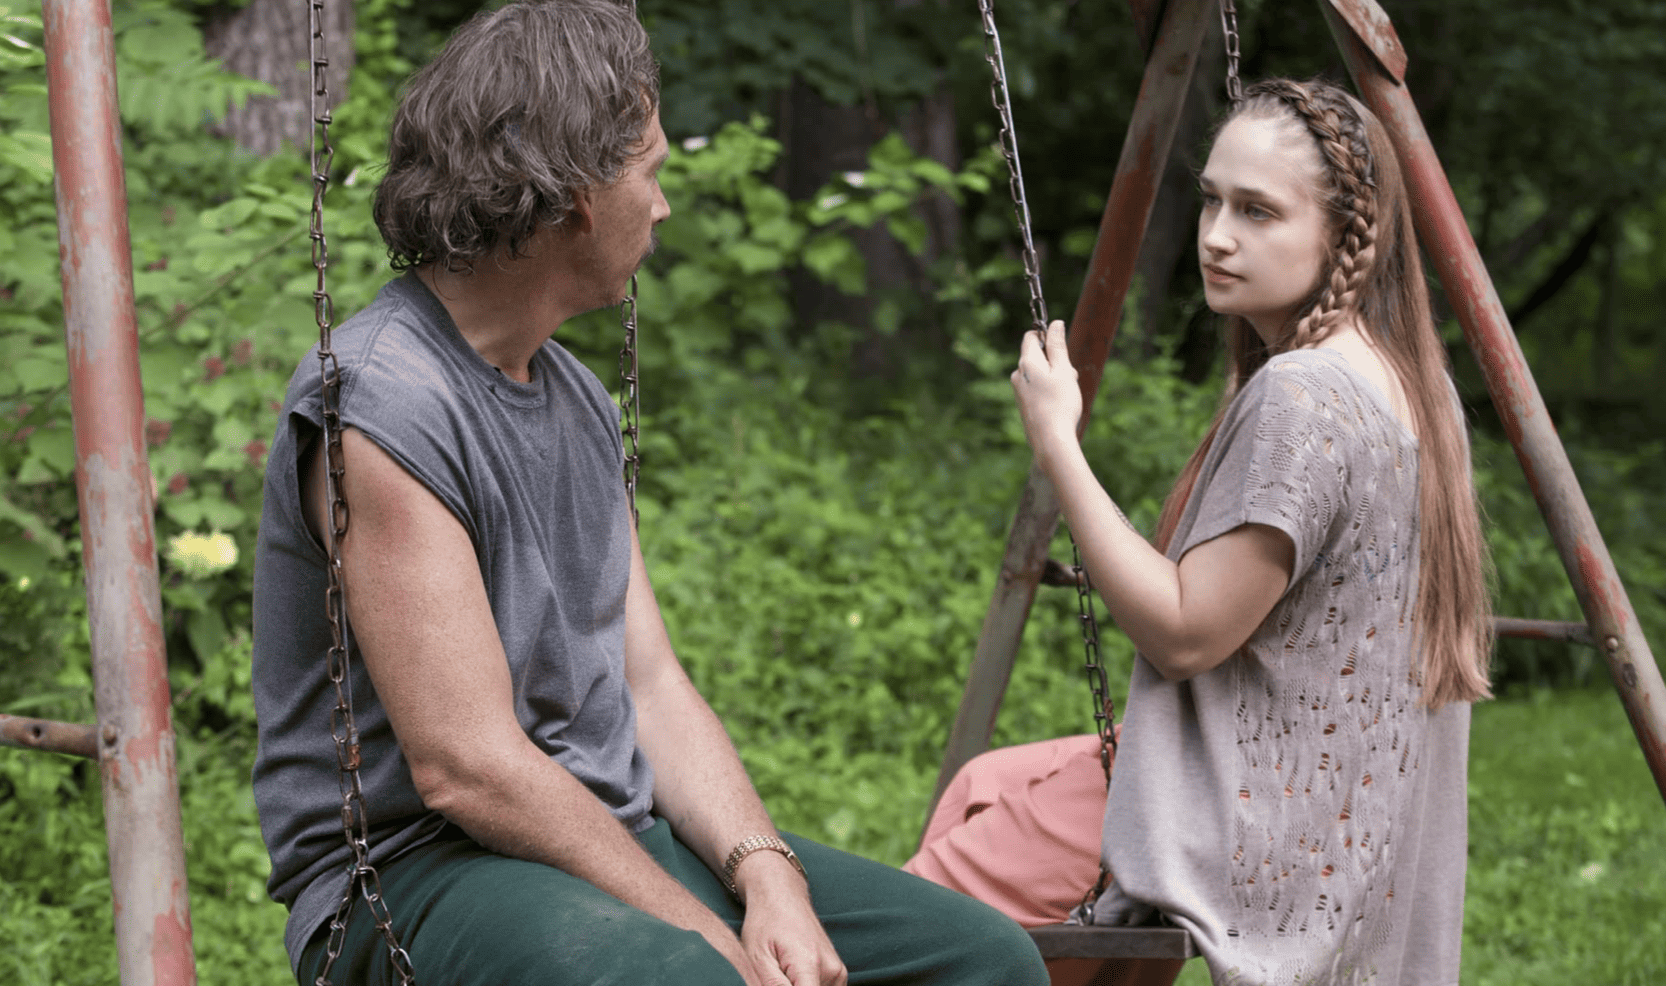 Jessa Johansson on a swing staring at a man in this image from Apatow Productions